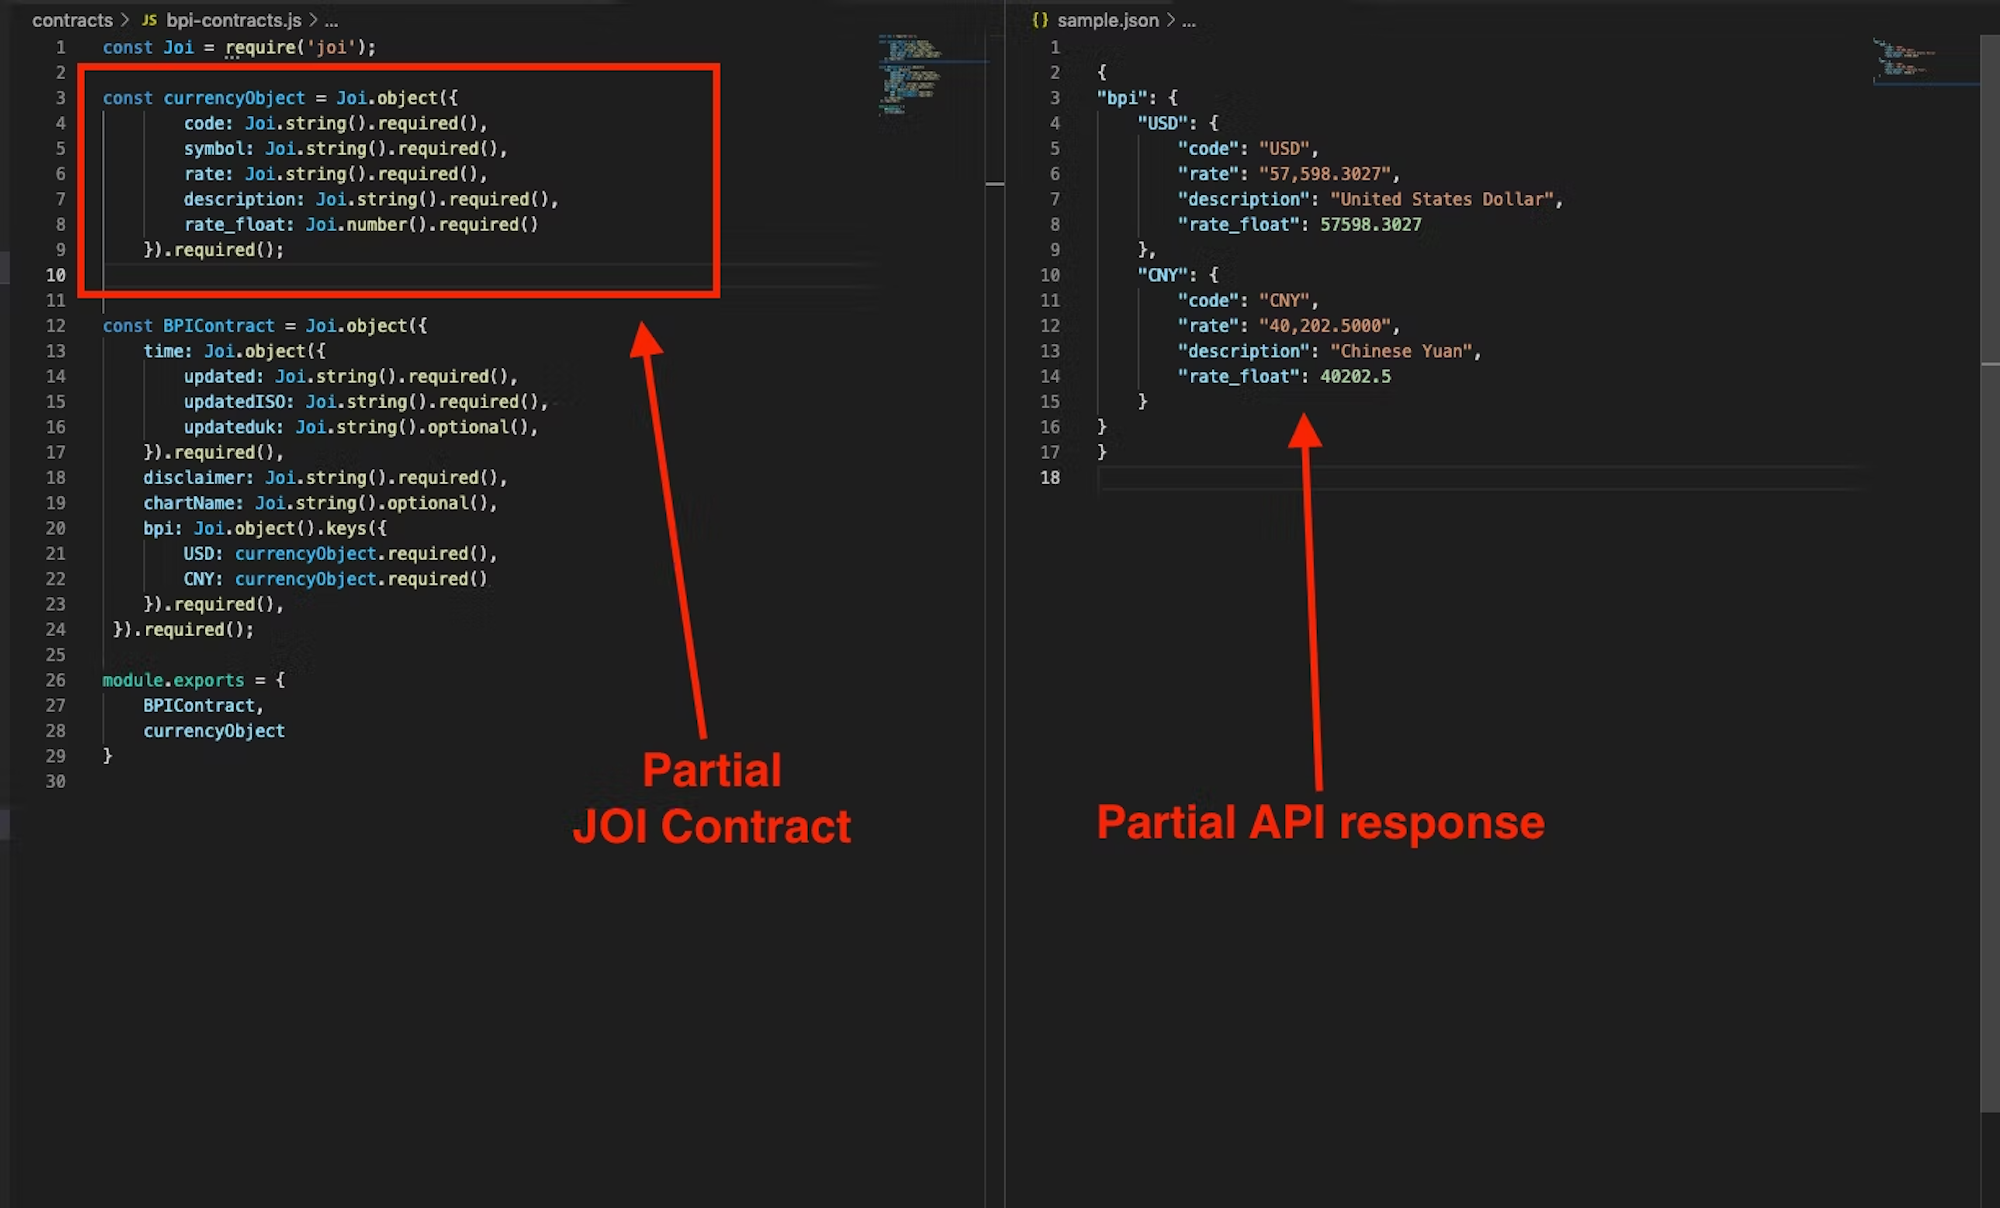 Partial API response and JOI contract